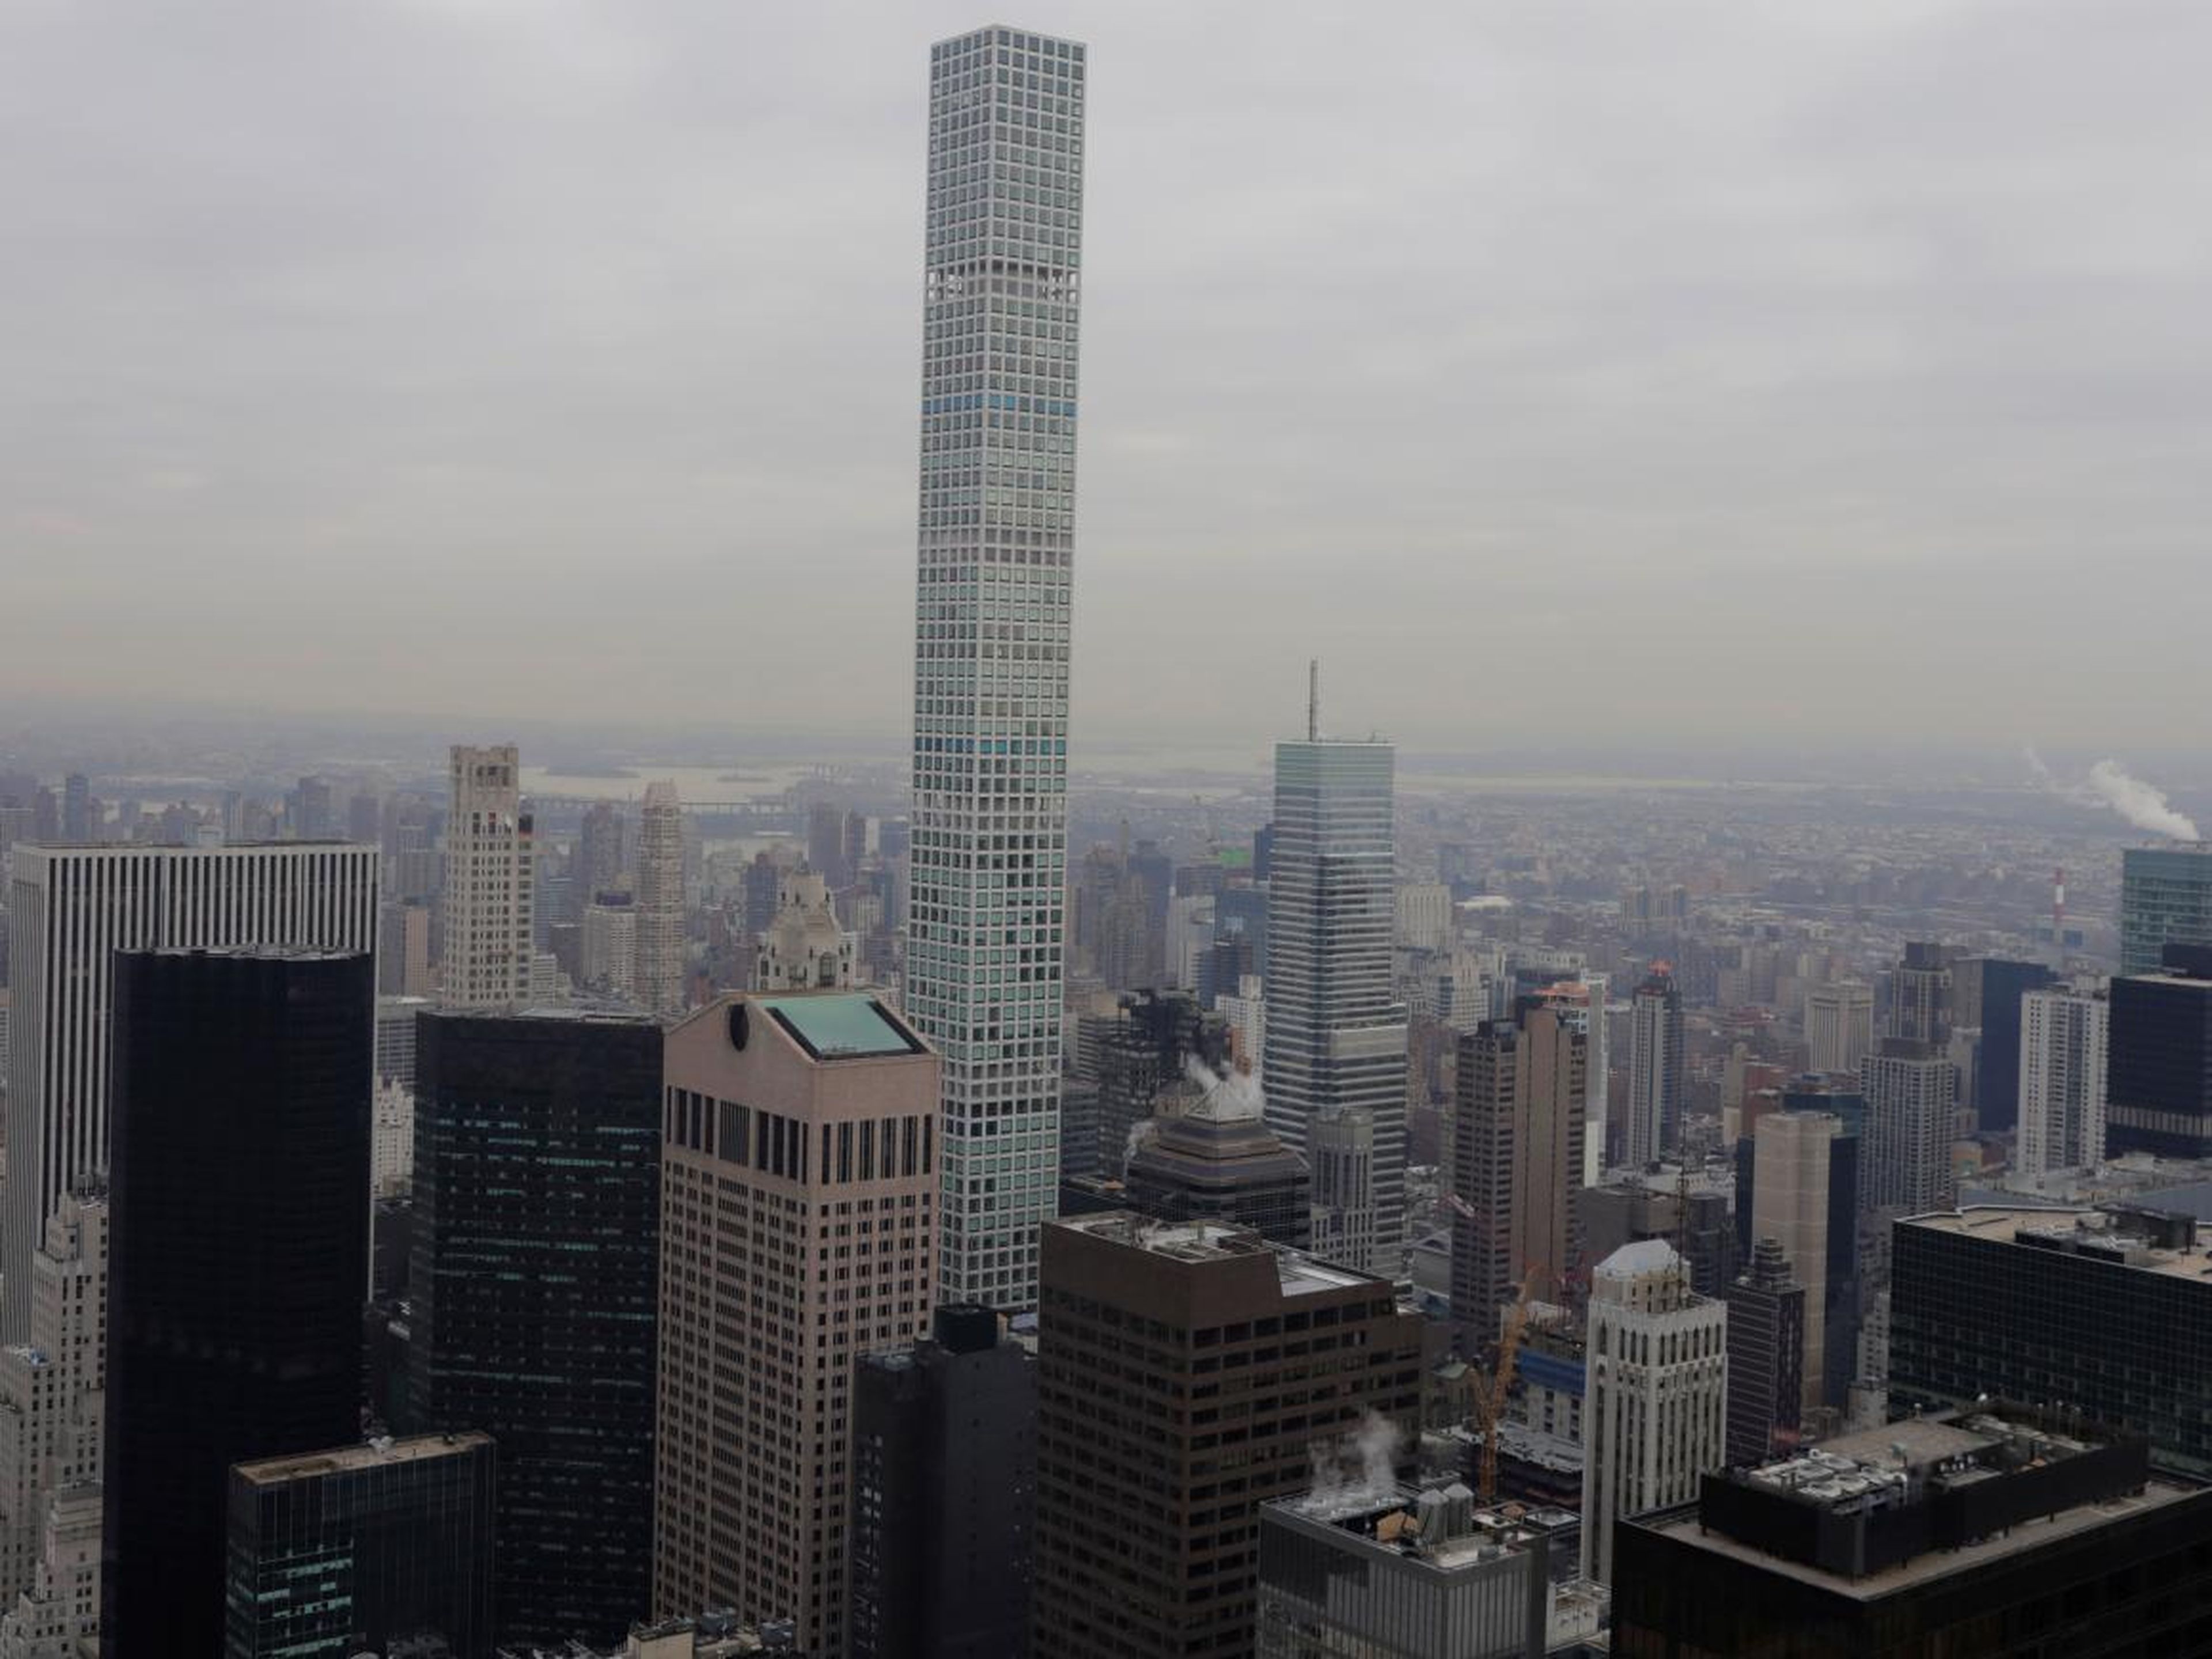 The penthouse unit just below, on the 94th floor, sold in 2018 for $32.4 million, about $8 million less than its asking price.